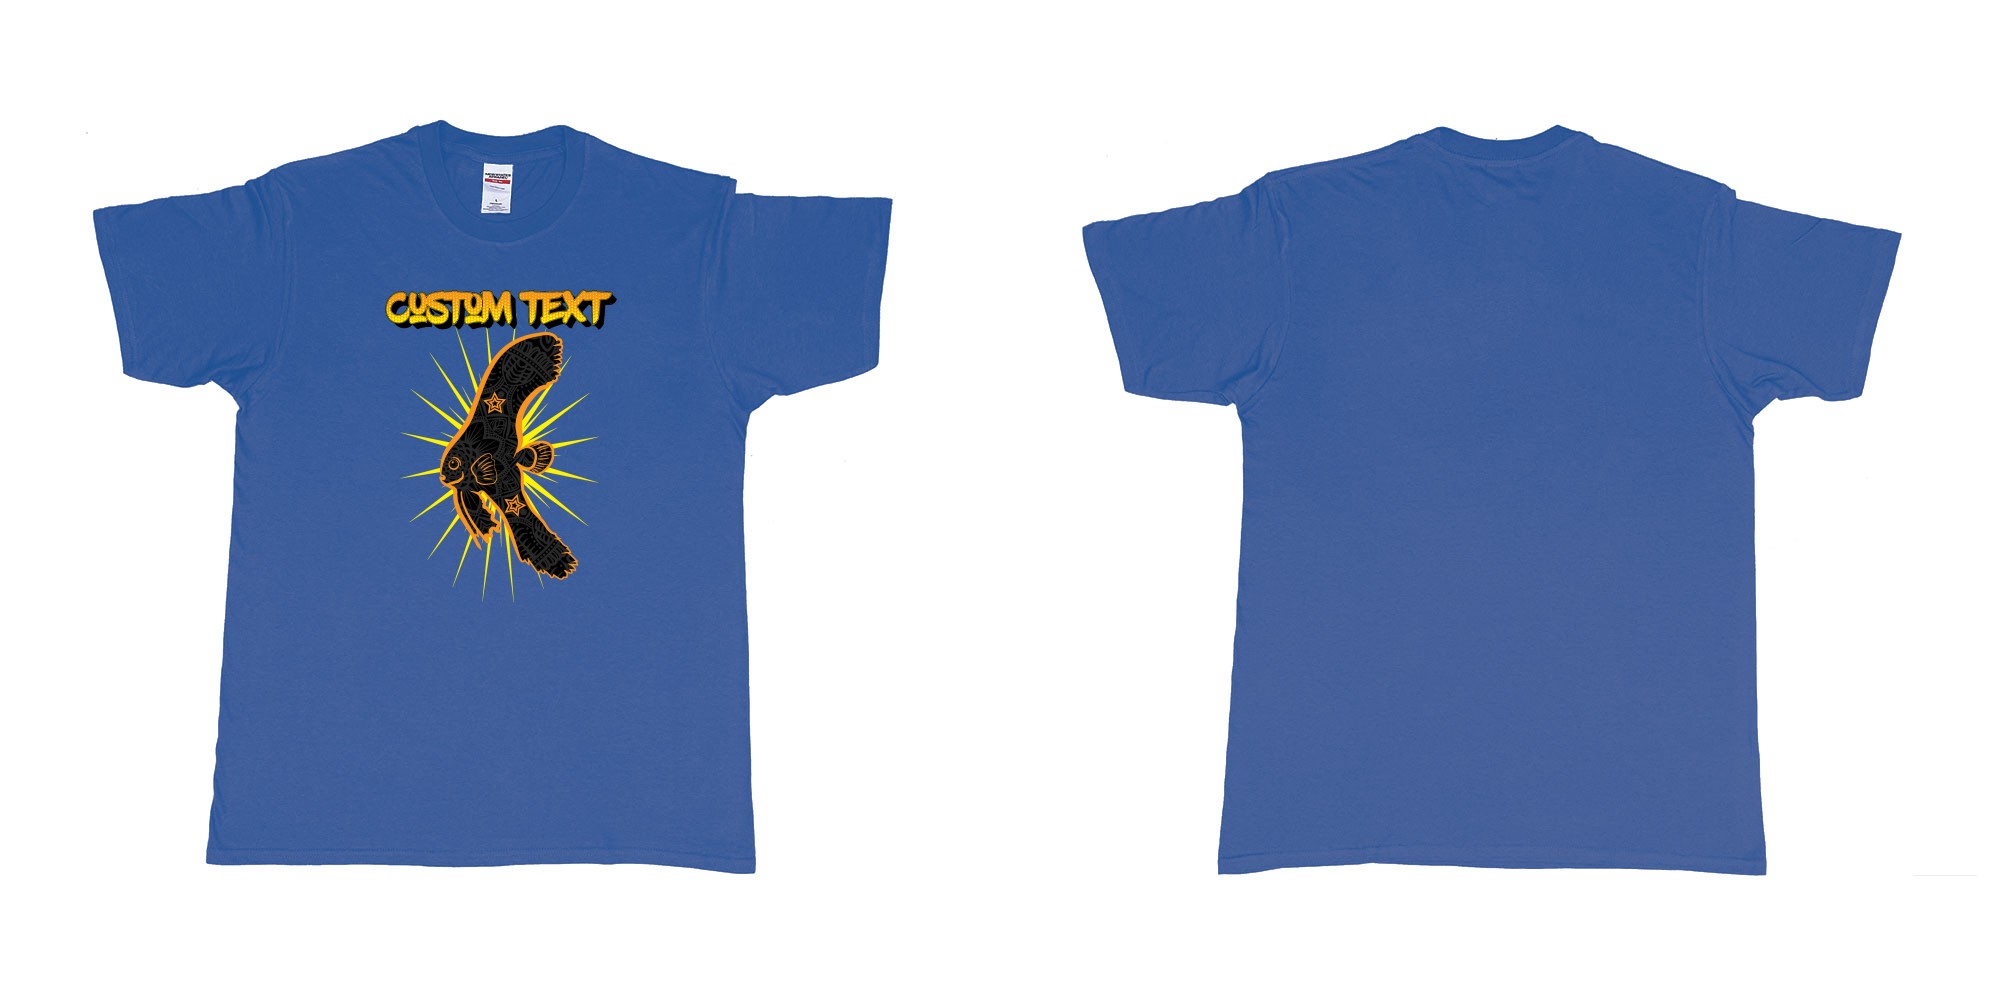 Custom tshirt design batfish juvenile star own text in fabric color royal-blue choice your own text made in Bali by The Pirate Way